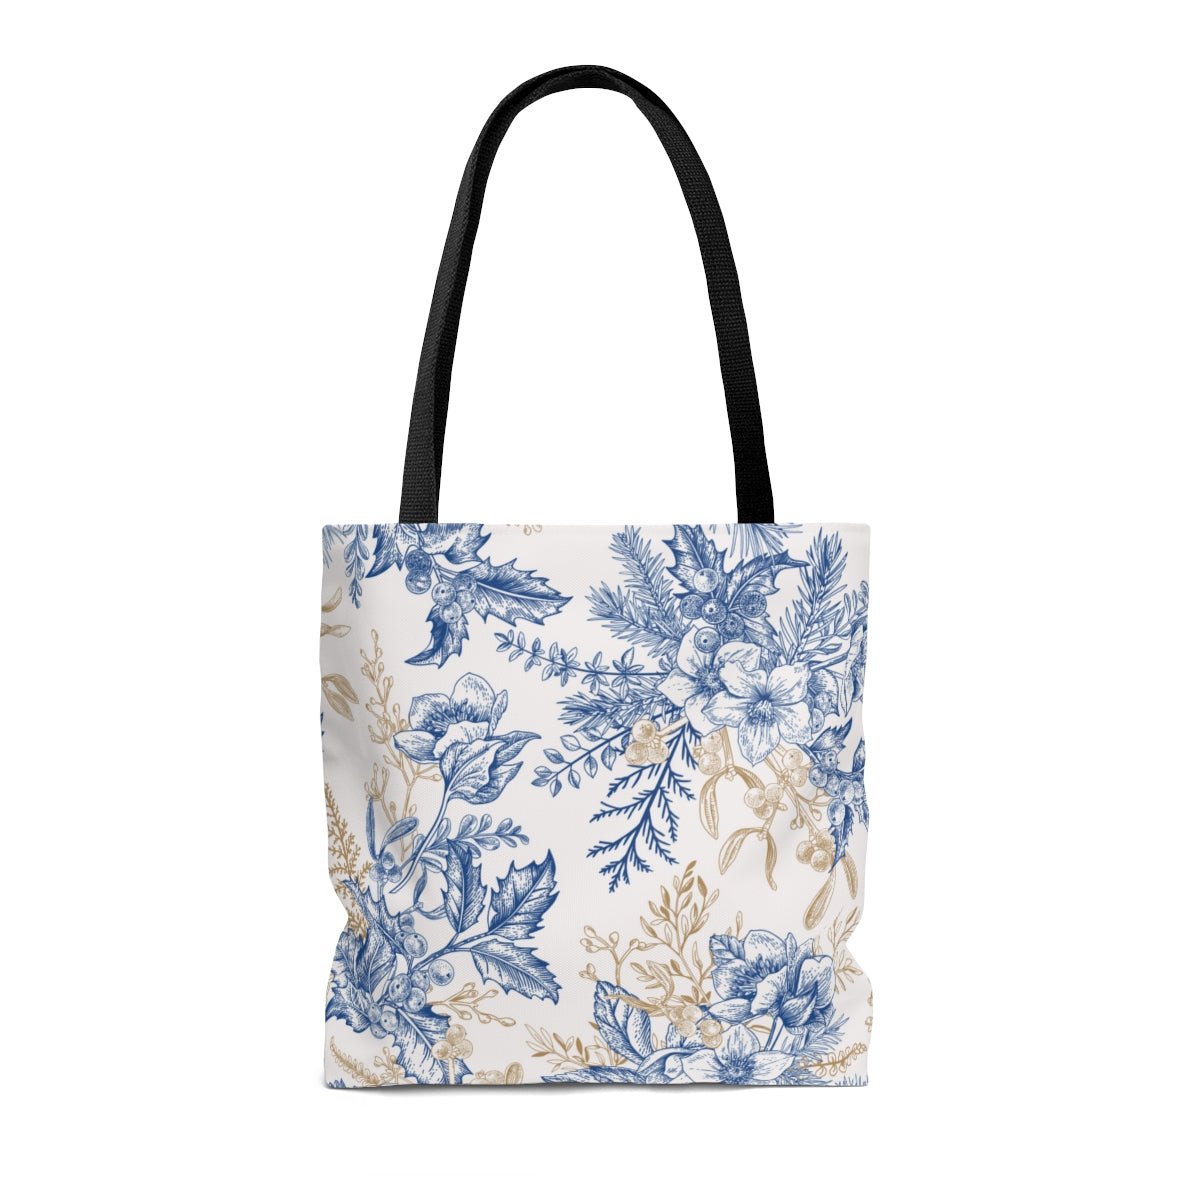 Winter Hellebore Flowers Tote Bag - Puffin Lime